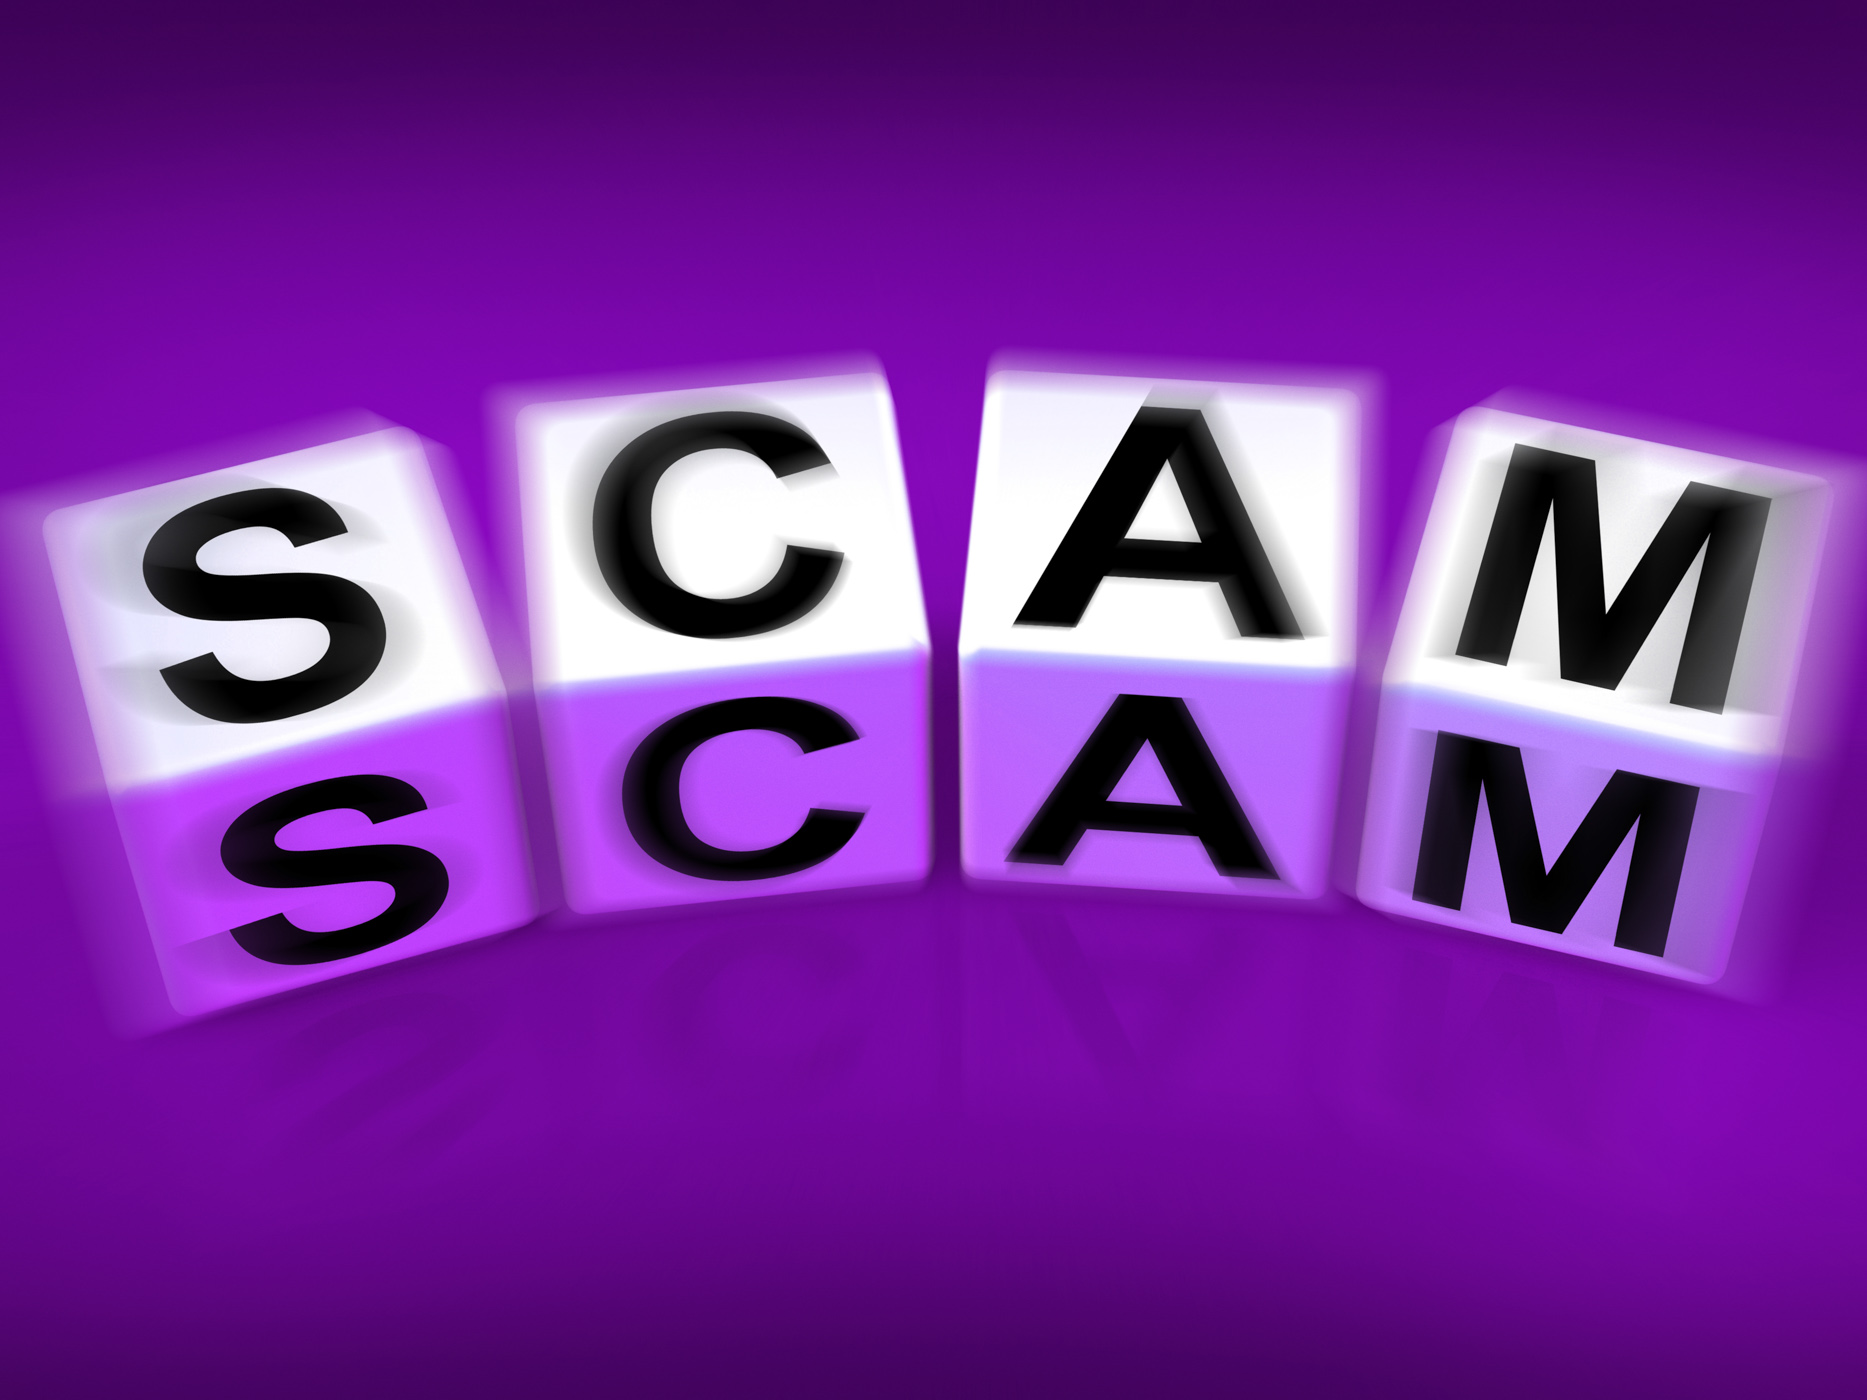 Scam displays fraud scheme to rip-off or deceive photo